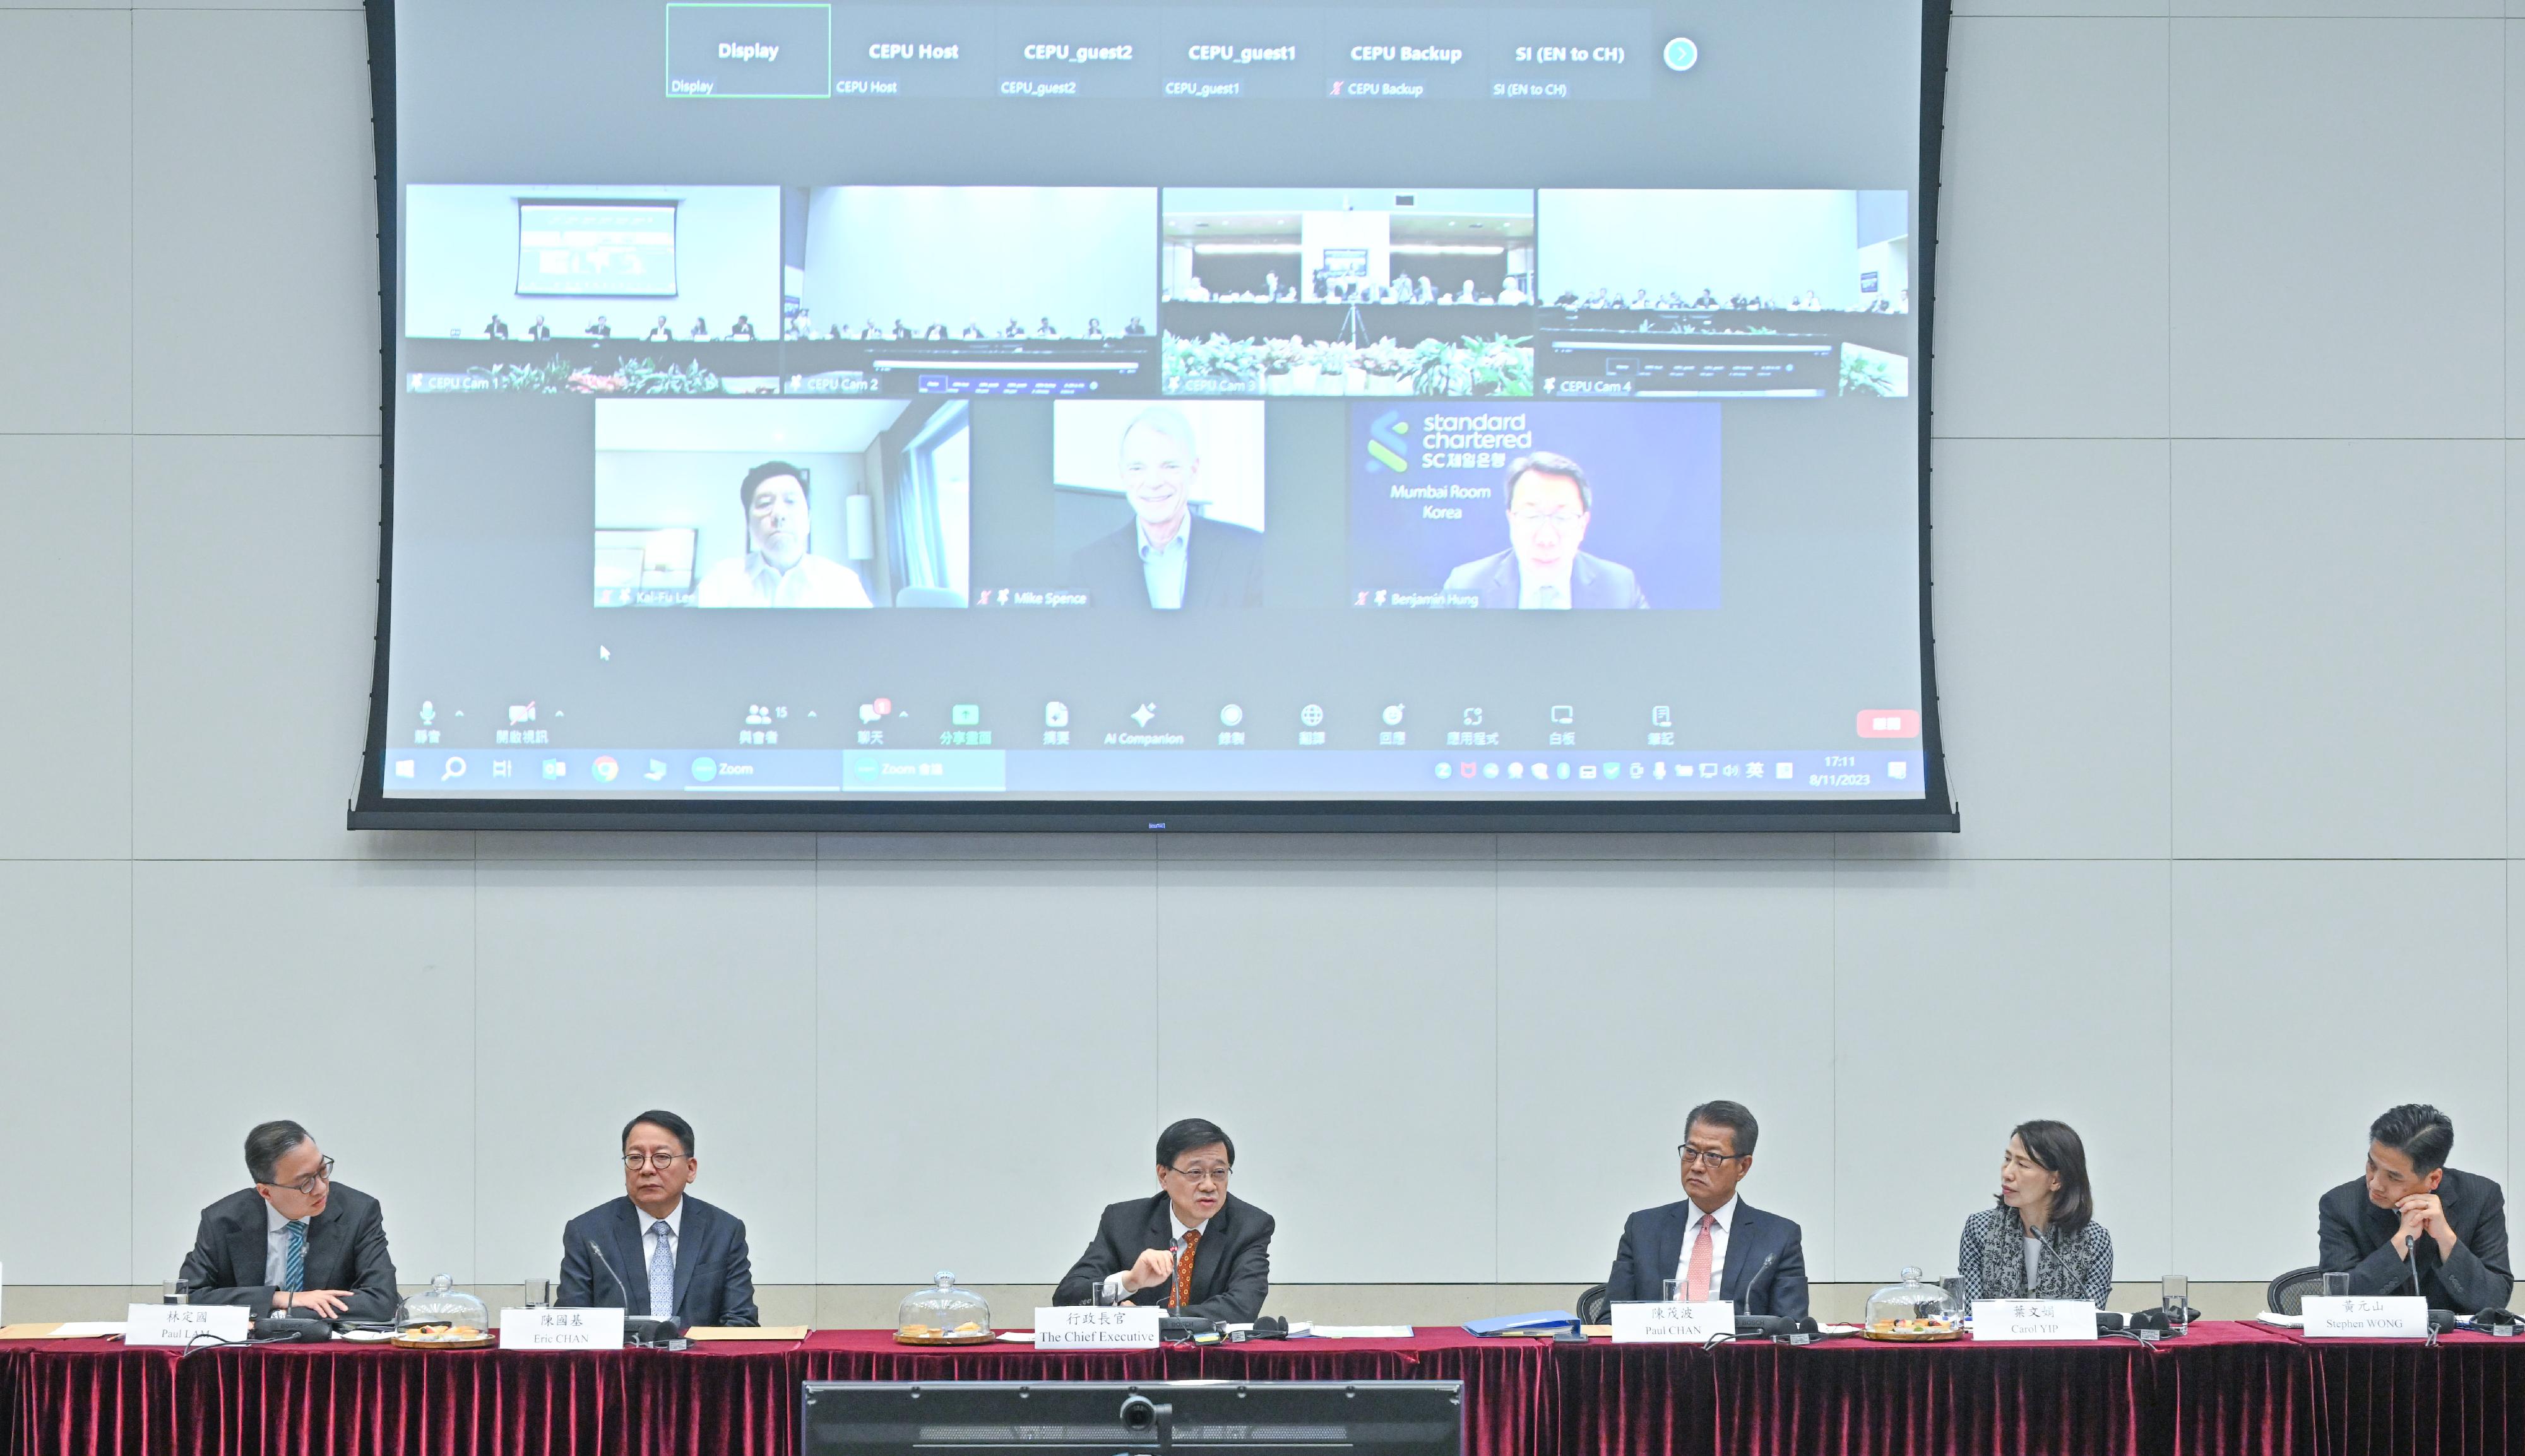 The Chief Executive, Mr John Lee (third left), chairs the second meeting of the Chief Executive's Council of Advisers at the Central Government Offices today (November 8). The Chief Secretary for Administration, Mr Chan Kwok-ki (second left); the Financial Secretary, Mr Paul Chan (third right); the Secretary for Justice, Mr Paul Lam (first left), SC; the Director of Chief Executive's Office, Ms Carol Yip (second right); and the Head of Chief Executive's Policy Unit, Dr Stephen Wong (first right), among others, were in attendance.